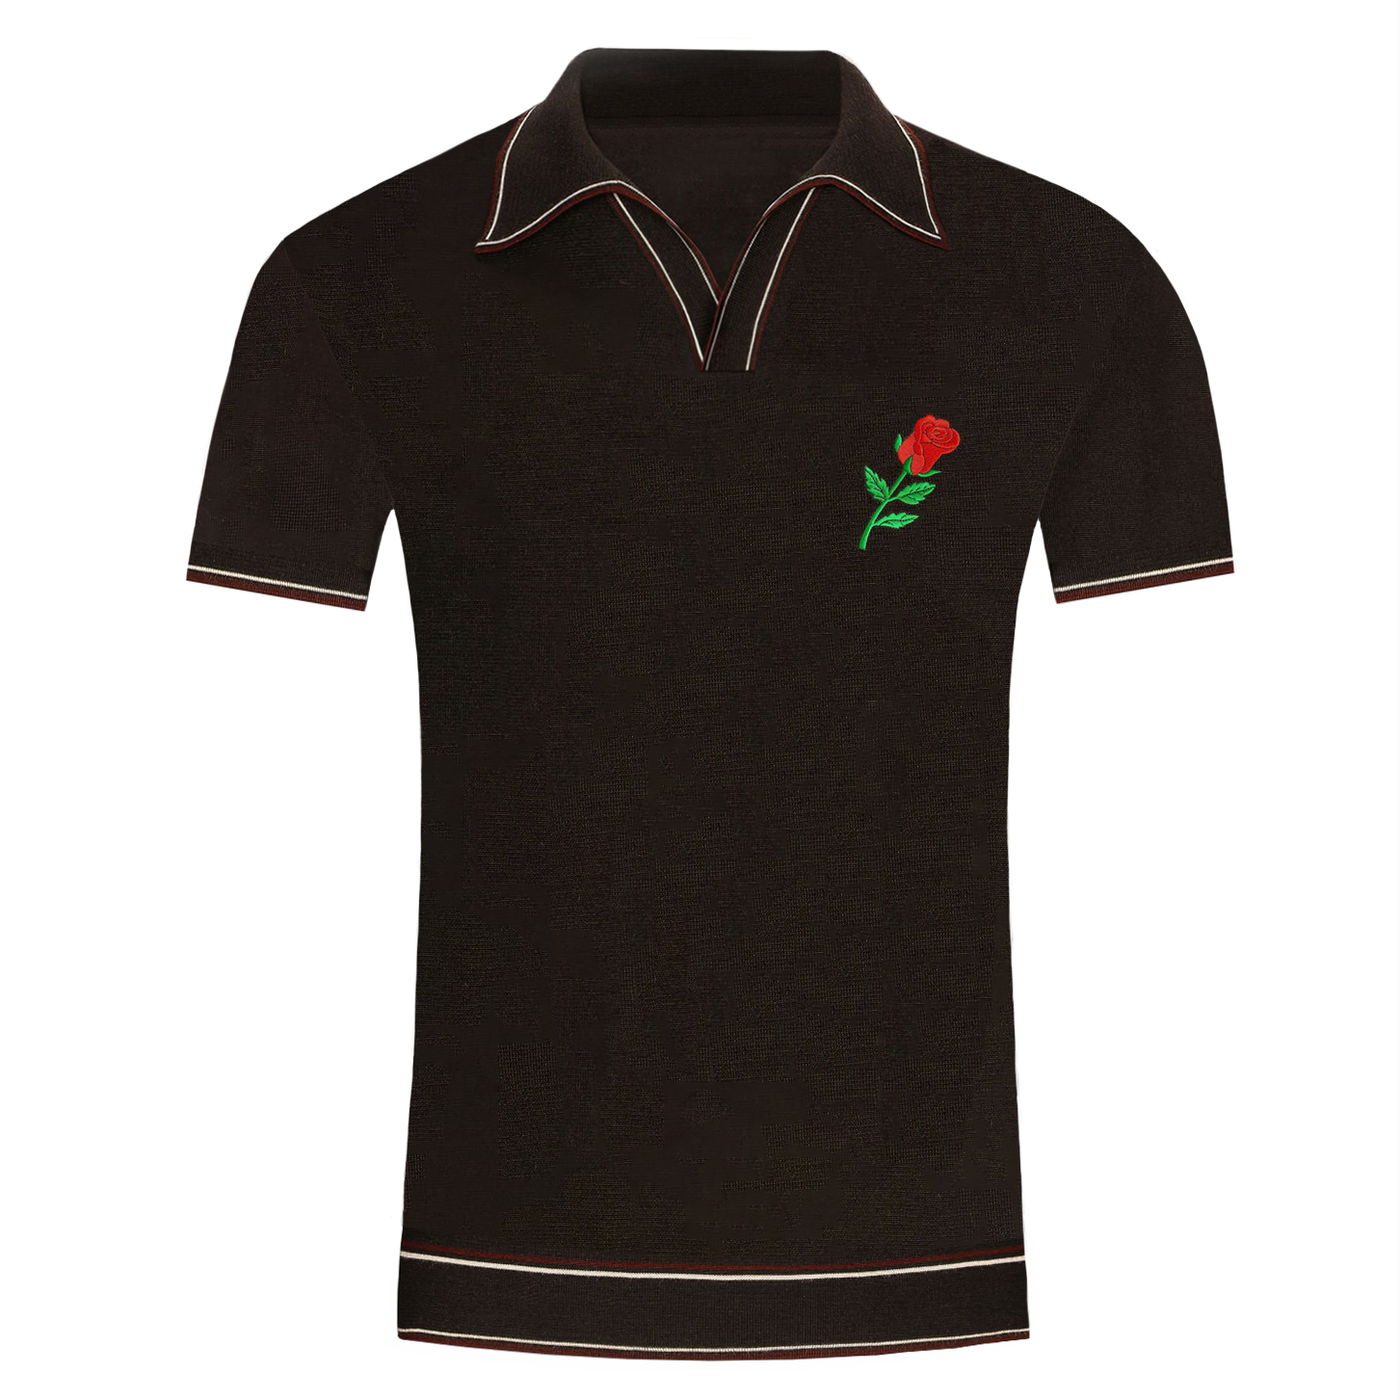 Men's brown vintage period V-neck embroidered knit polo shirt